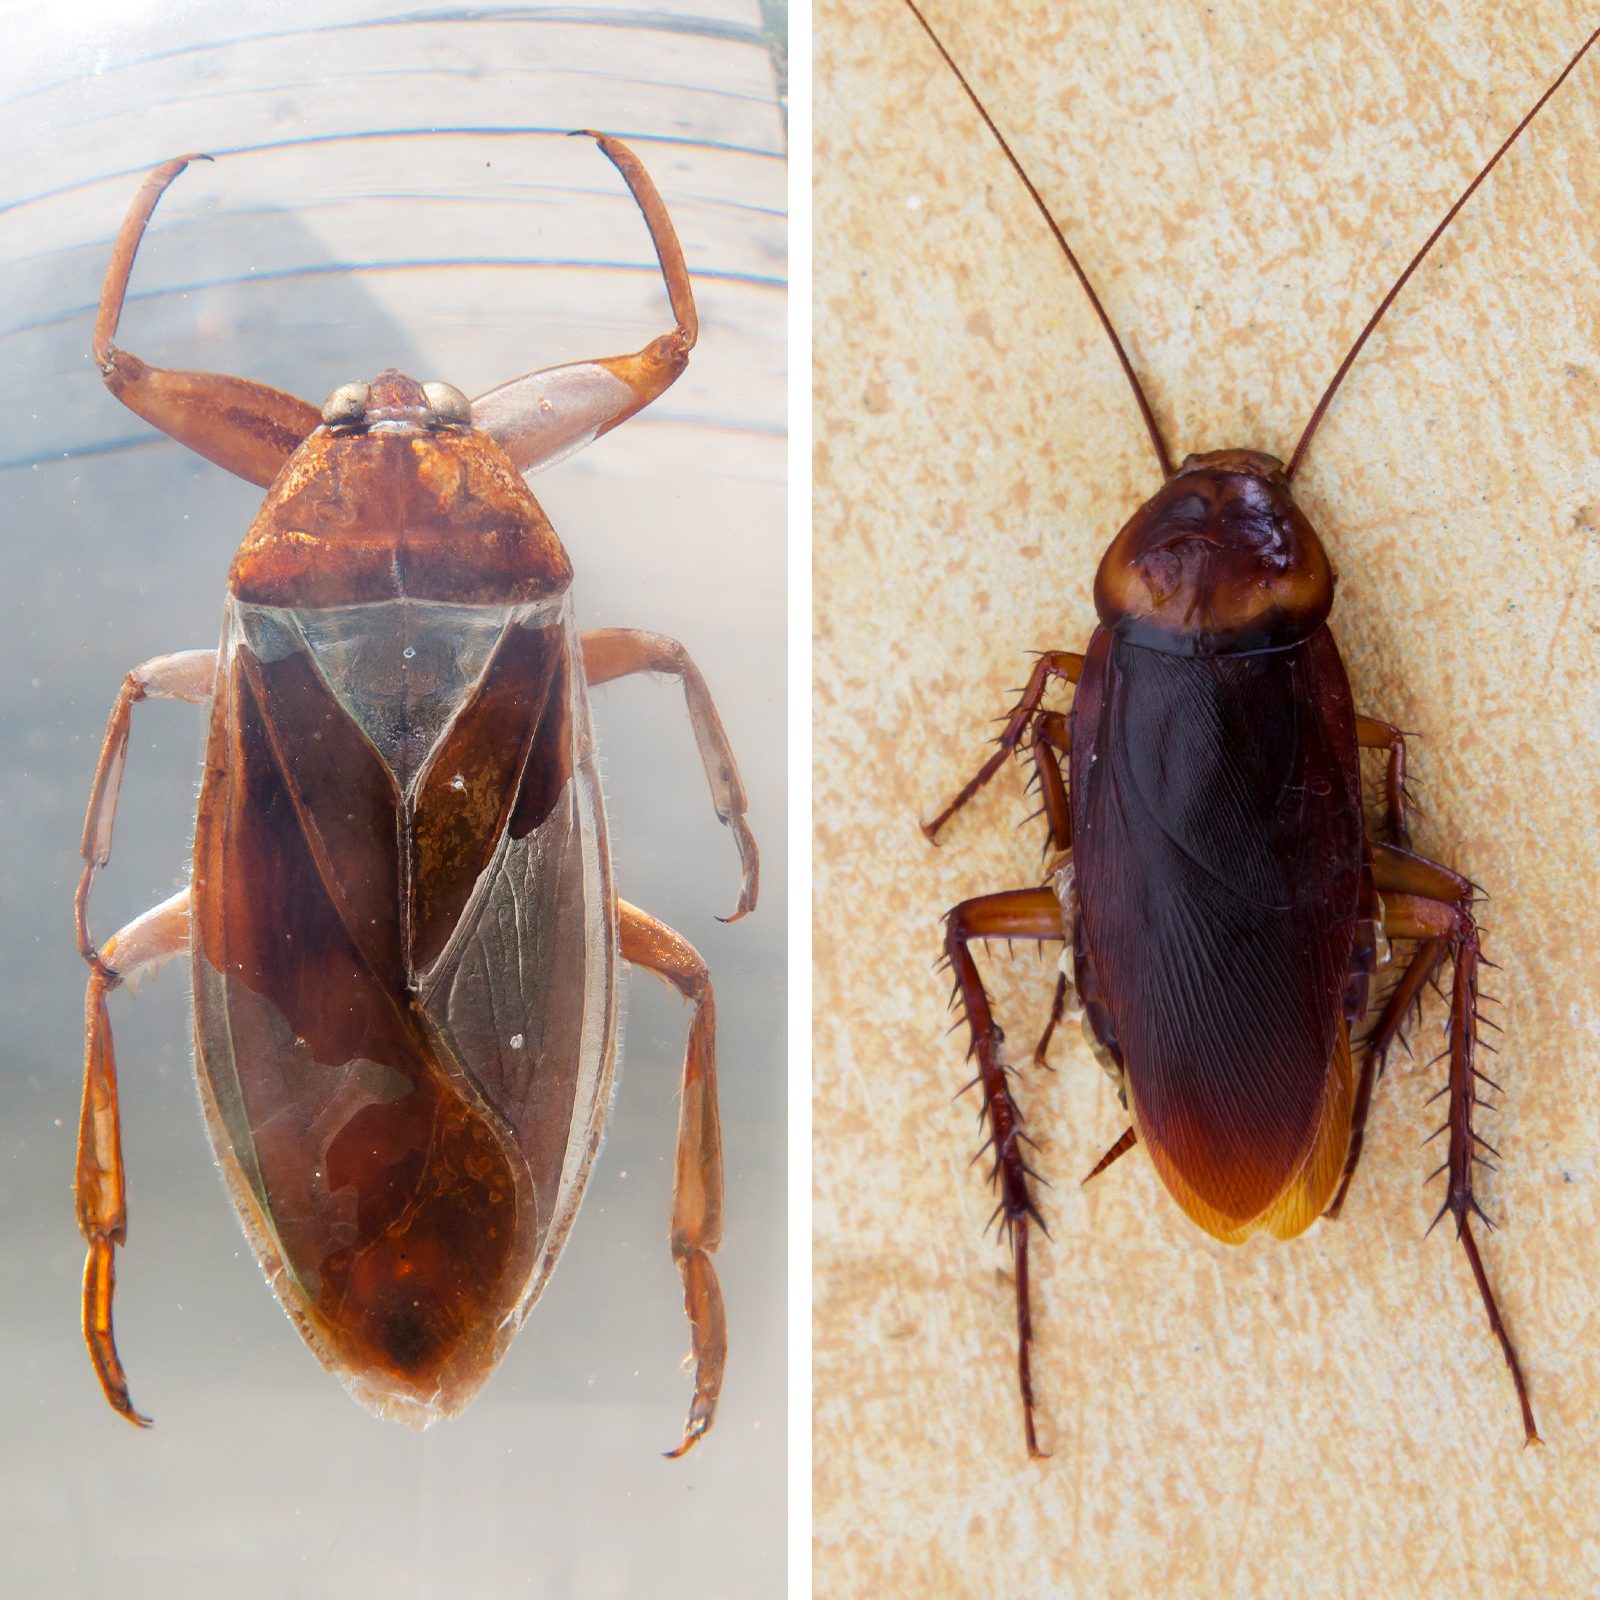 Water Bugs vs. Cockroaches: What's the Difference?